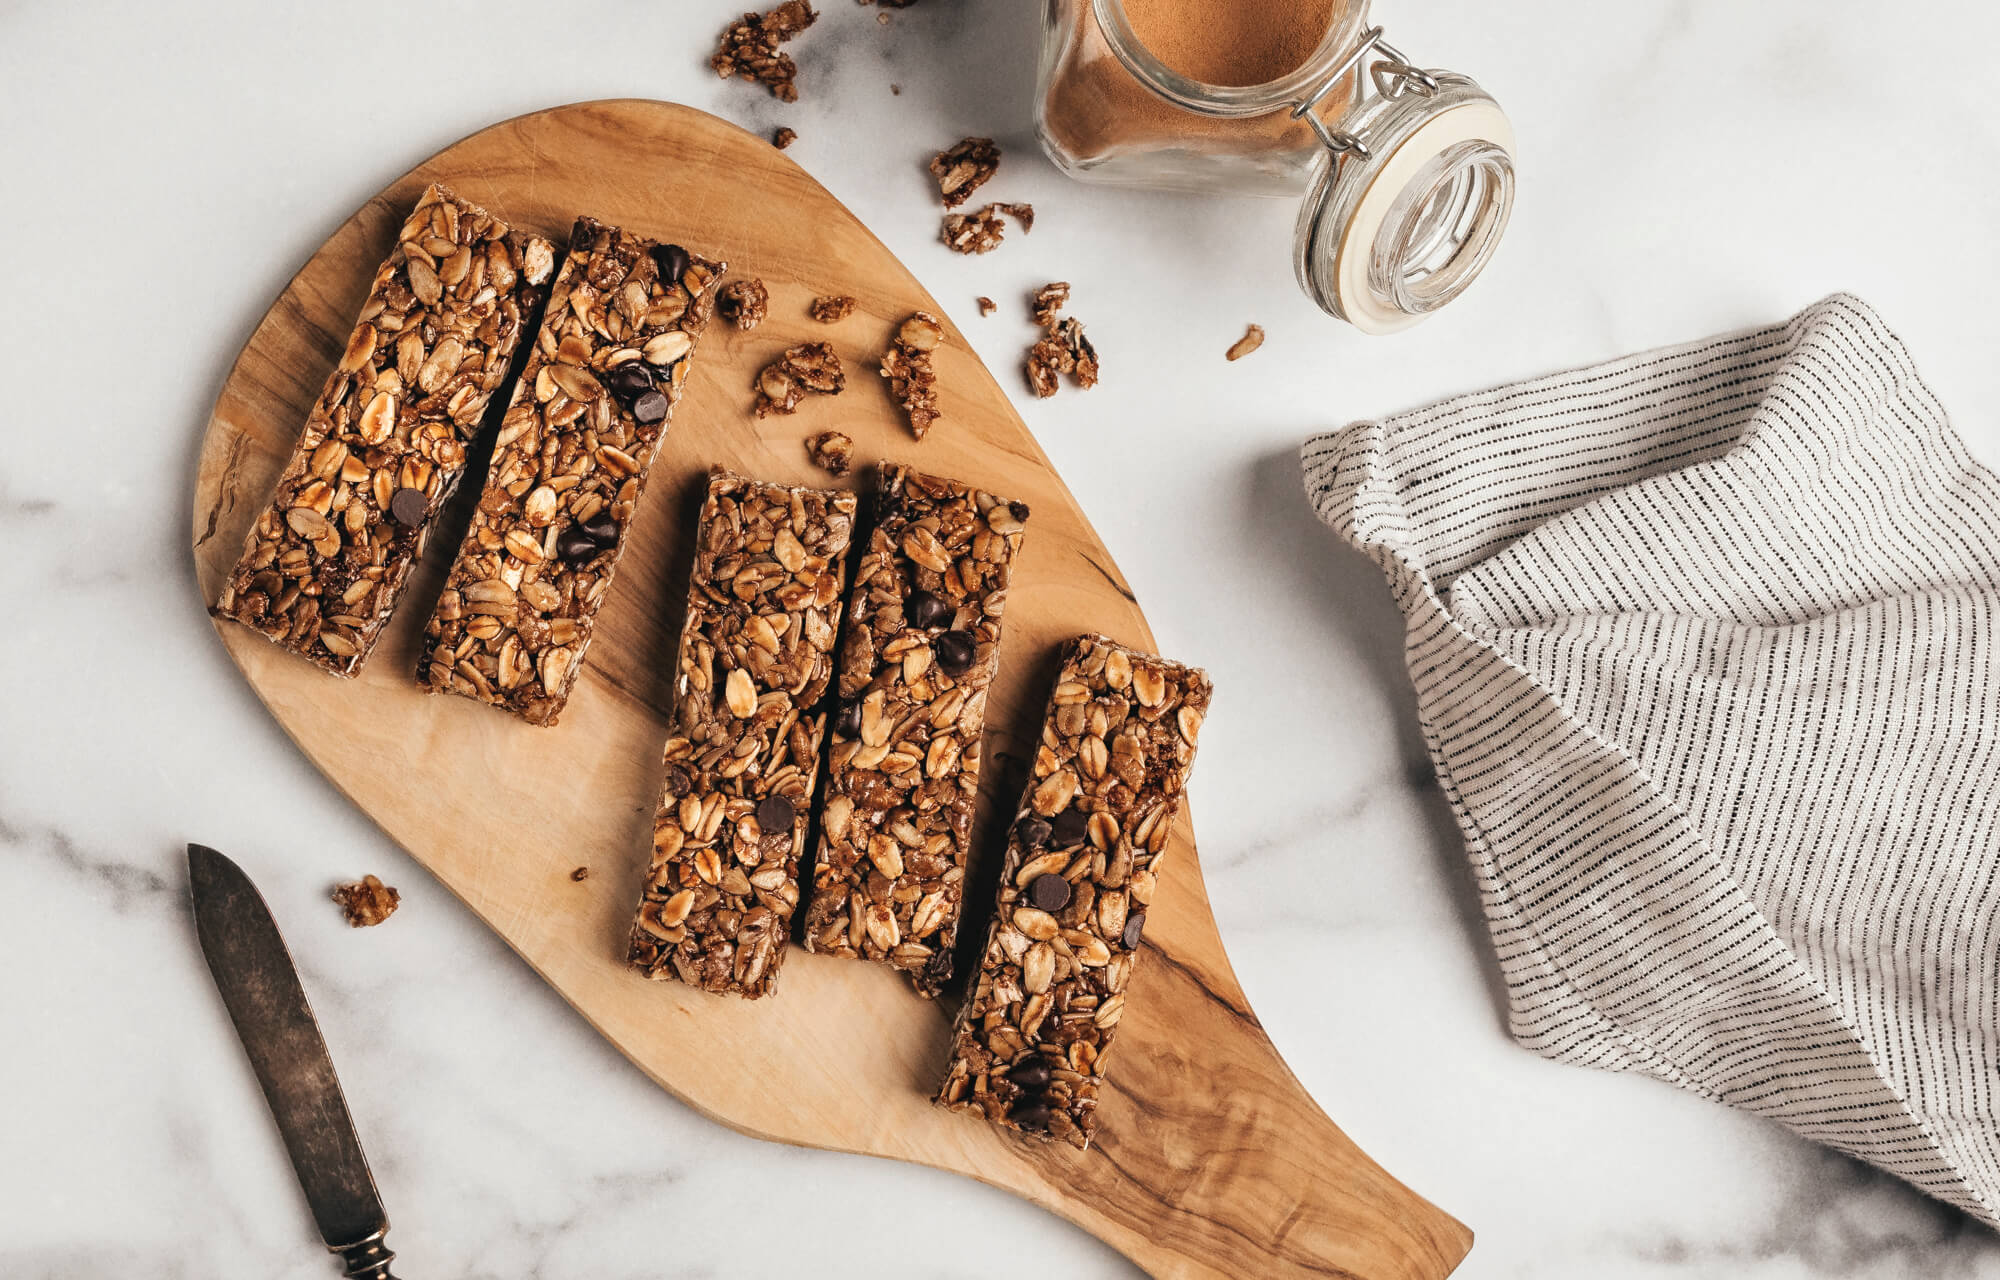 granola bars made with evergrain ingredients